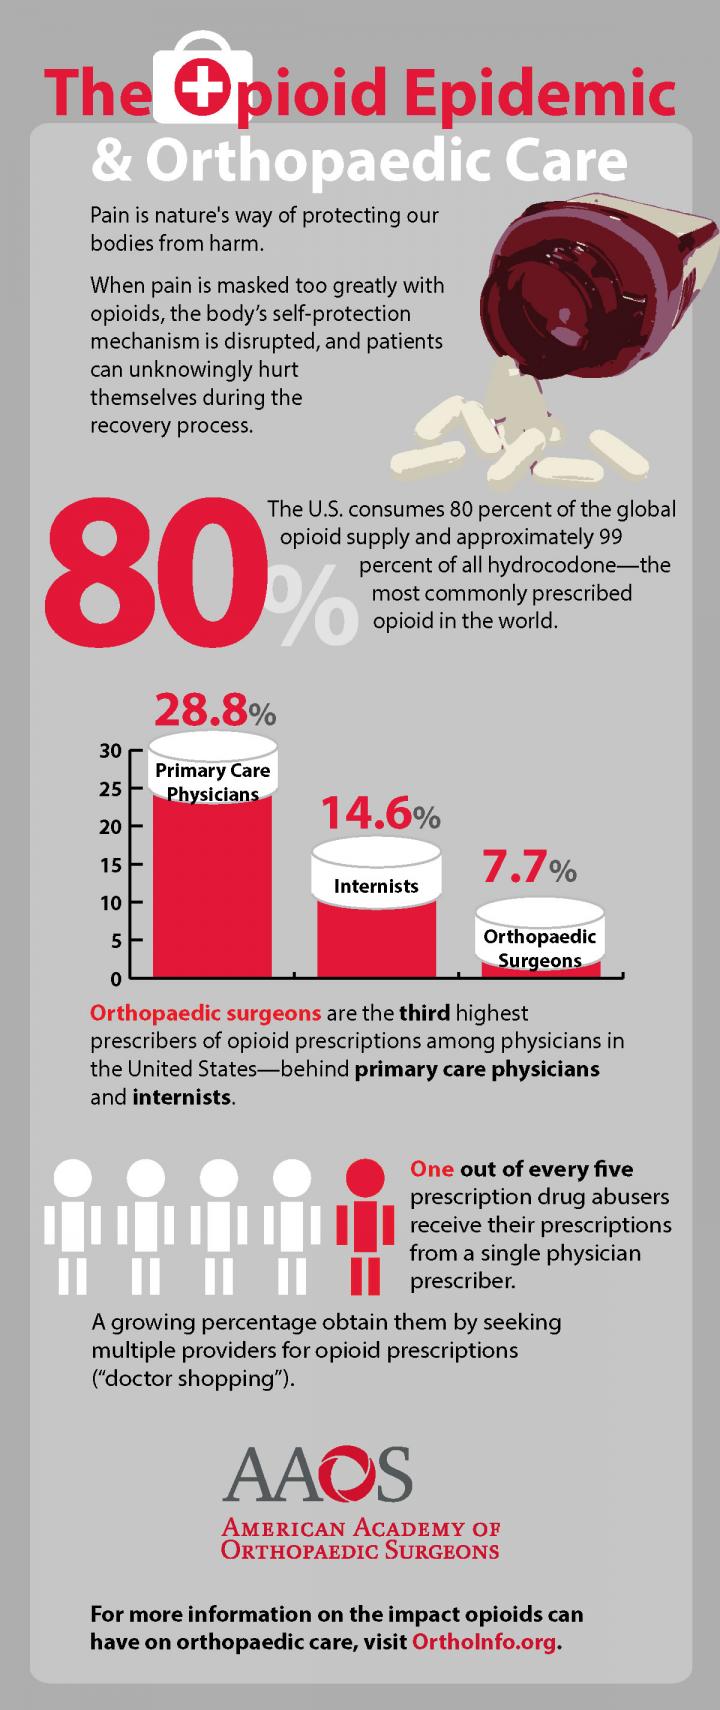 The Opioid Epidemic and Orthopaedic Care